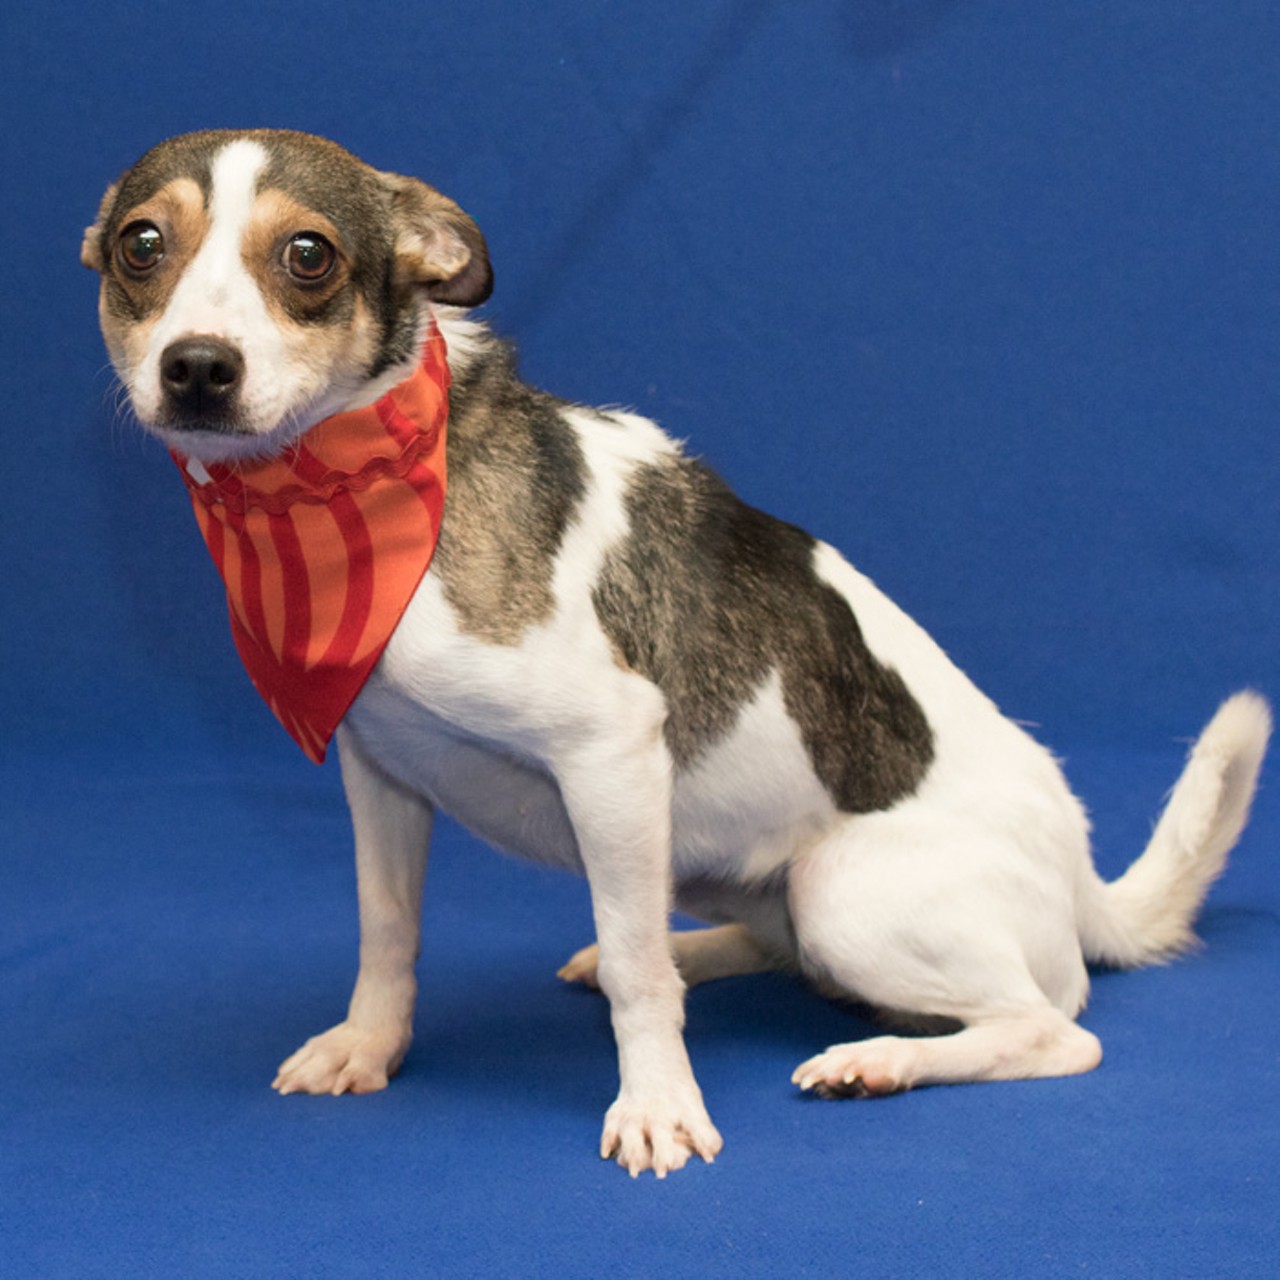 NAME: Sparkles
GENDER: Female
BREED: Jack Russell Terrier
AGE: 6 years, 1 month
WEIGHT: 14 pounds
SPECIAL CONSIDERATIONS: Prefers to be your only pet
REASON I CAME TO MHS: Homeless in Westland
LOCATION: Petco of Sterling Heights
ID NUMBER: 861060